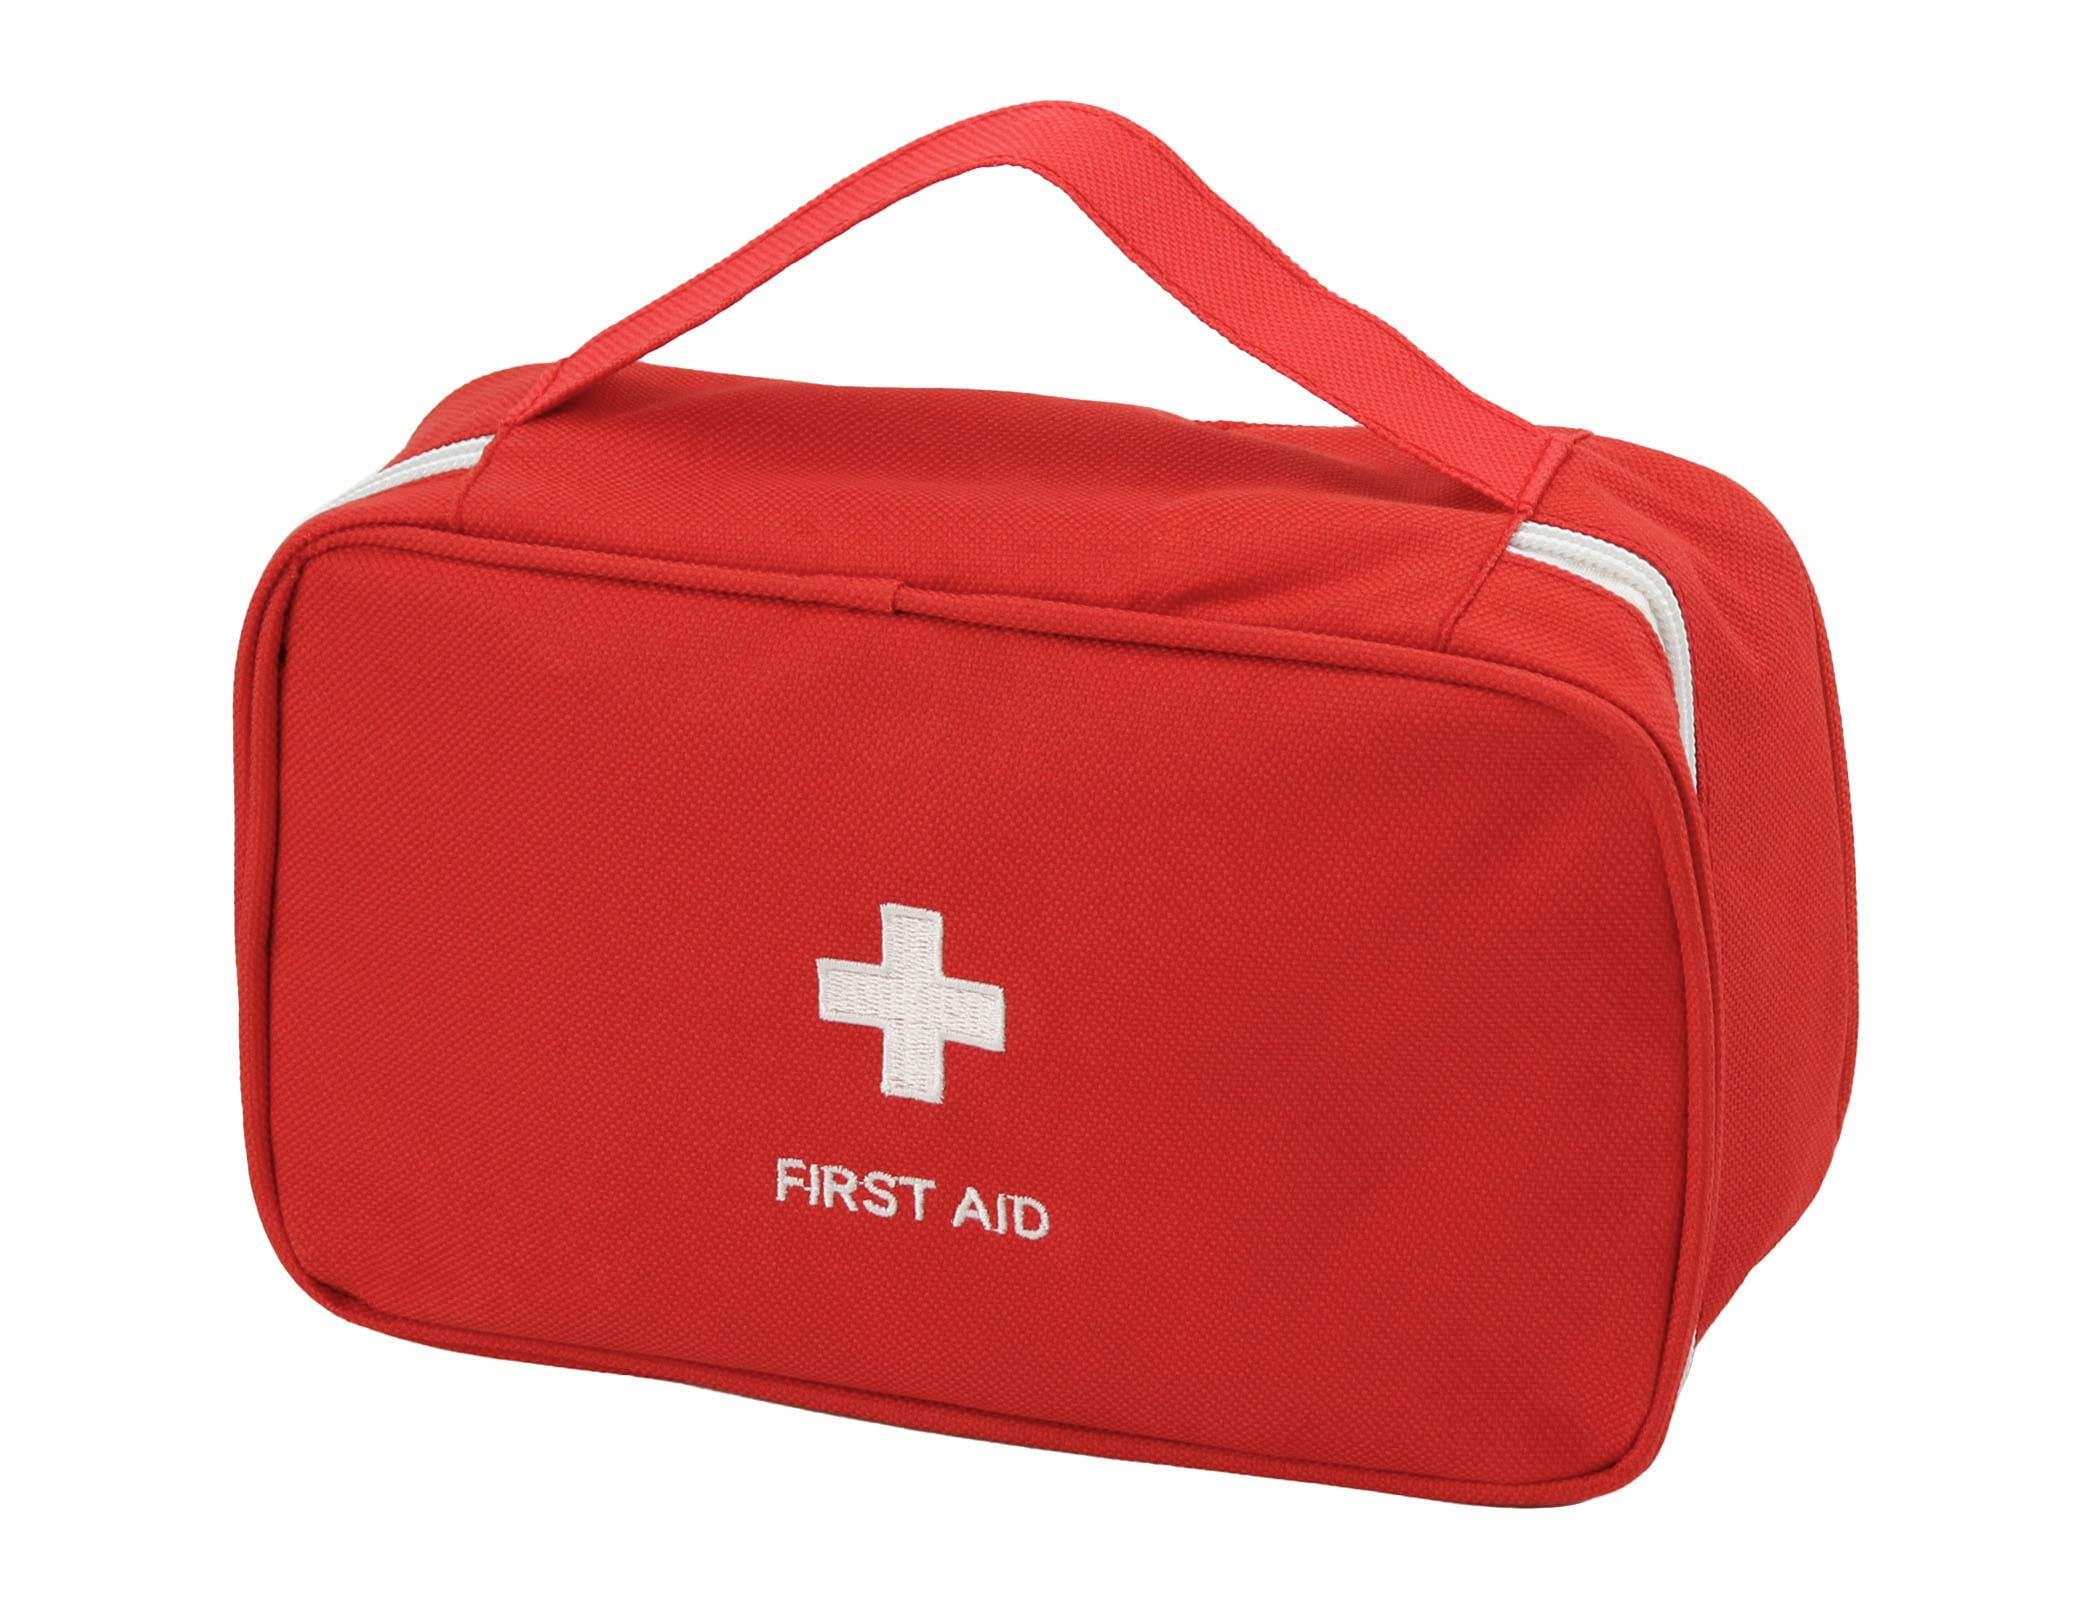 TOPASION Portable Empty First Aid Kit Bag Travel Medicine Pouch Small  Medical Bag (Red)